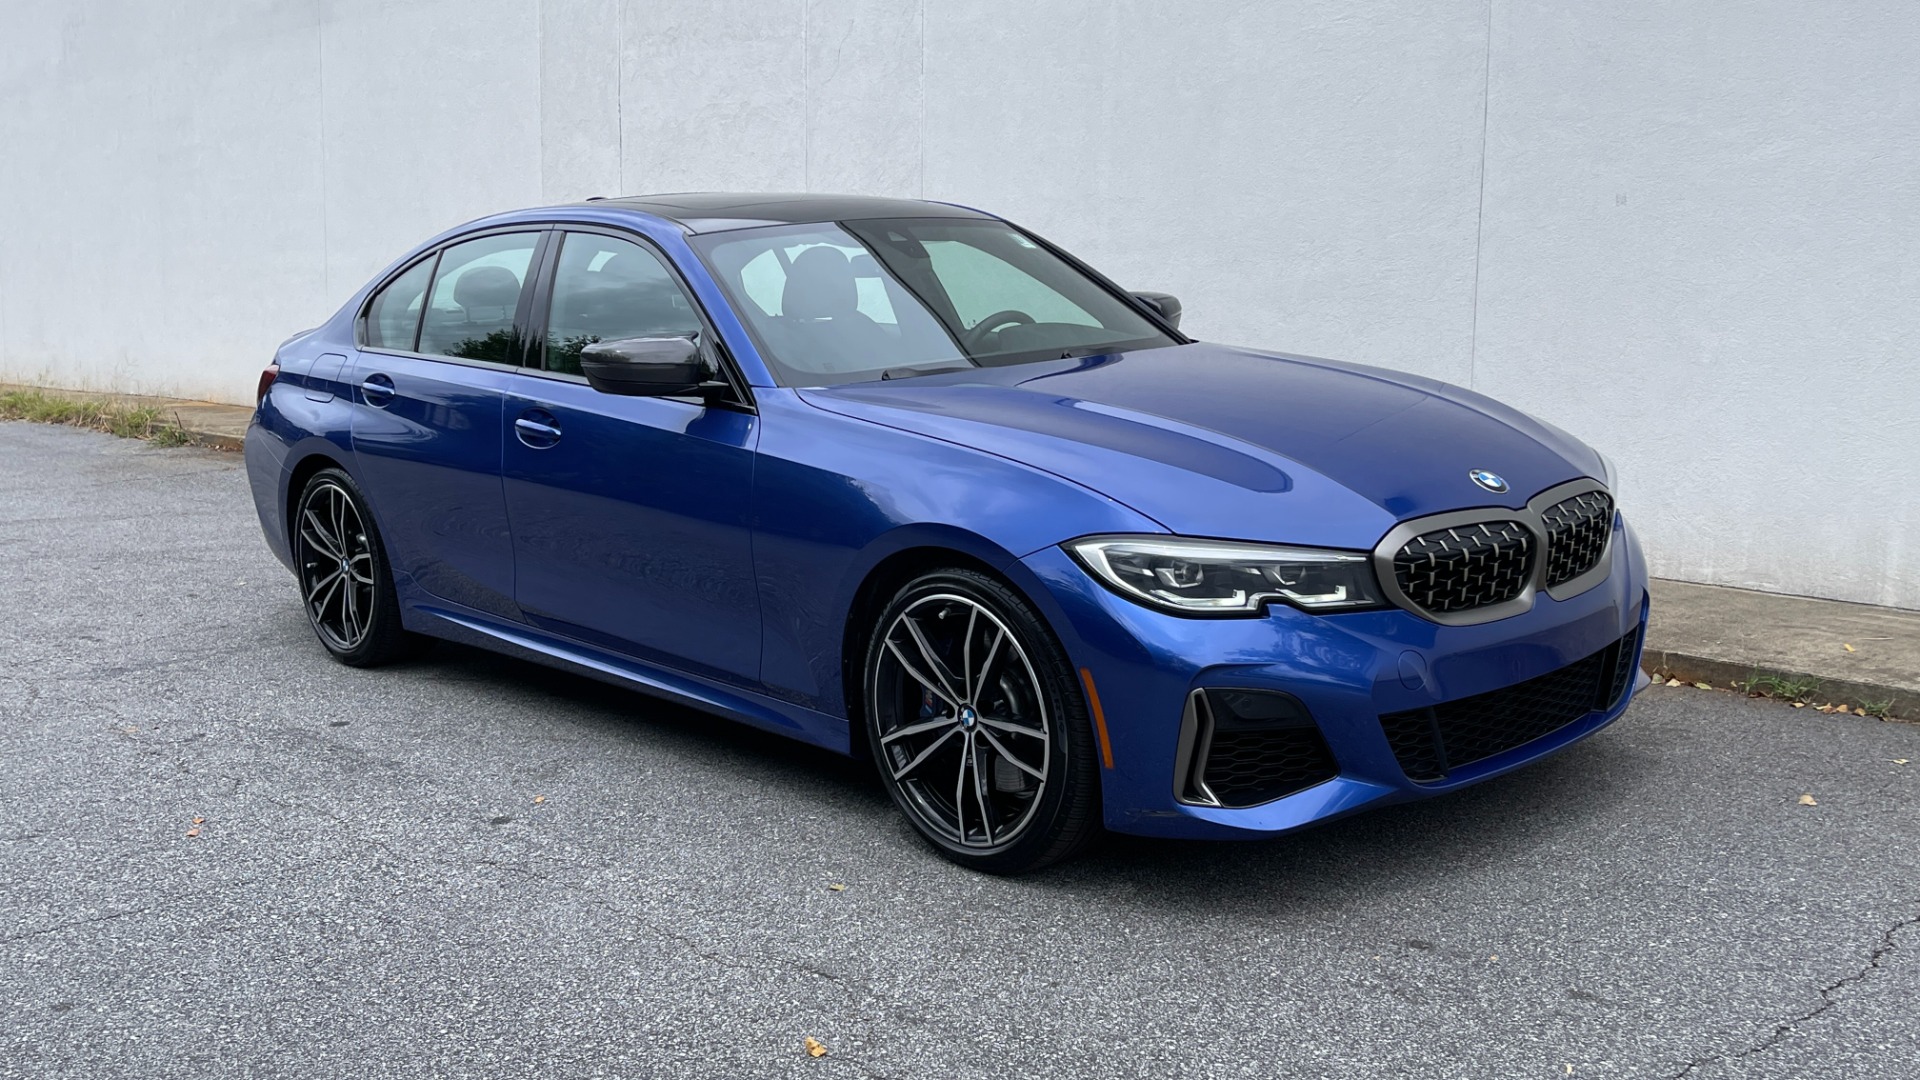 Used 2021 BMW 3 Series M340i / REMOTE START / DRIVING ASSISTANCE / 19IN WHEELS / INTAKE SYSTEM for sale Sold at Formula Imports in Charlotte NC 28227 5